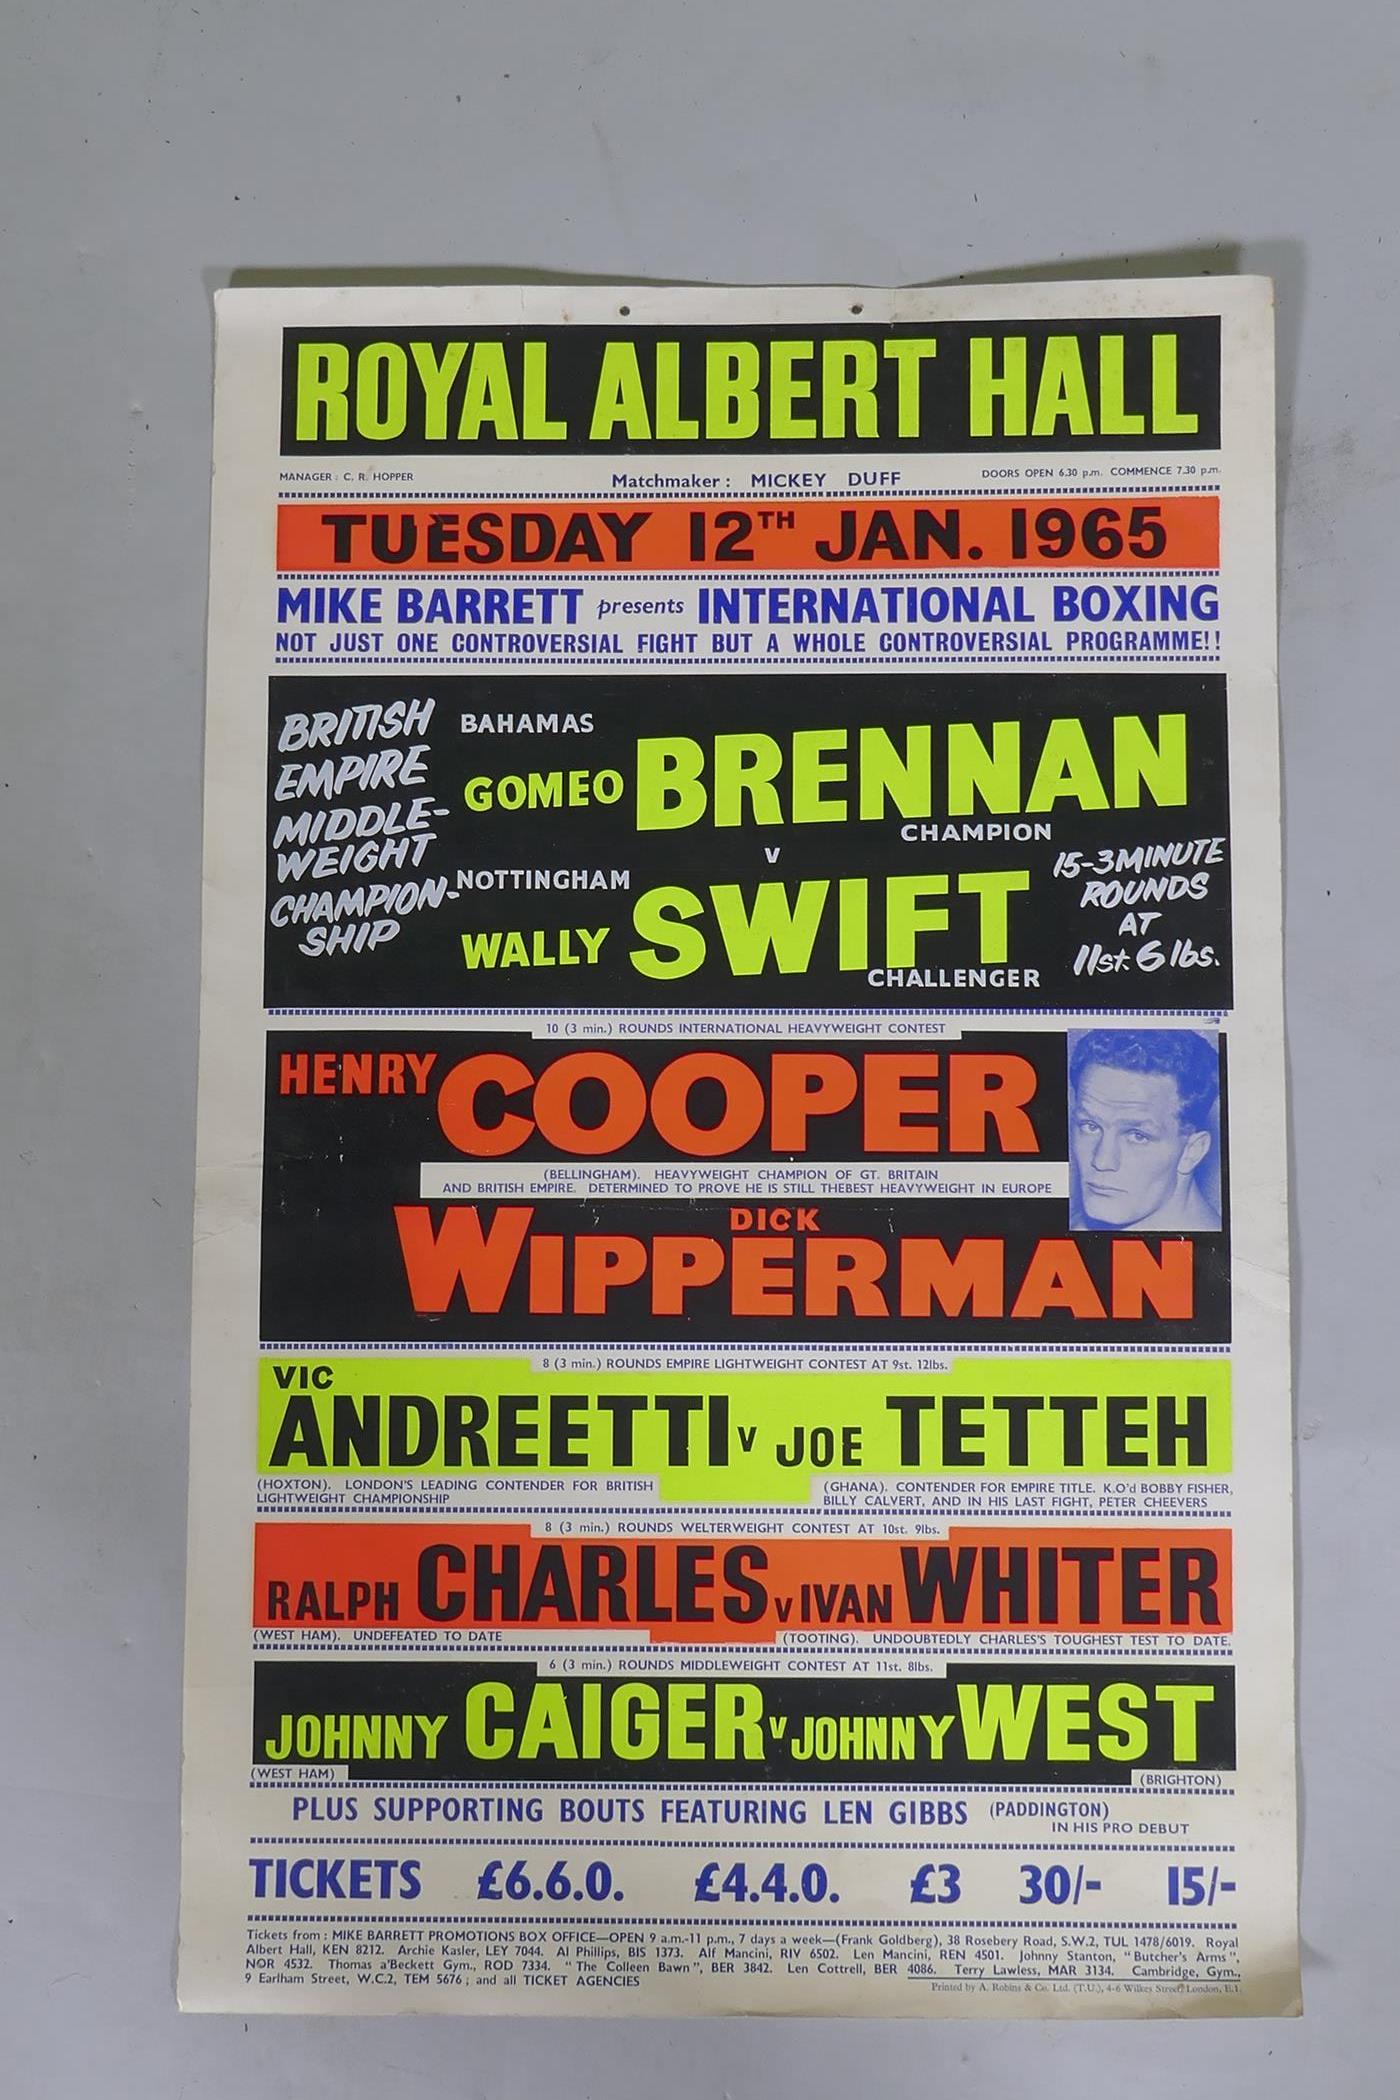 Of boxing interest: Henry Cooper v Dick Wipperman, international heavyweight contest, Tuesday 12th - Image 2 of 2